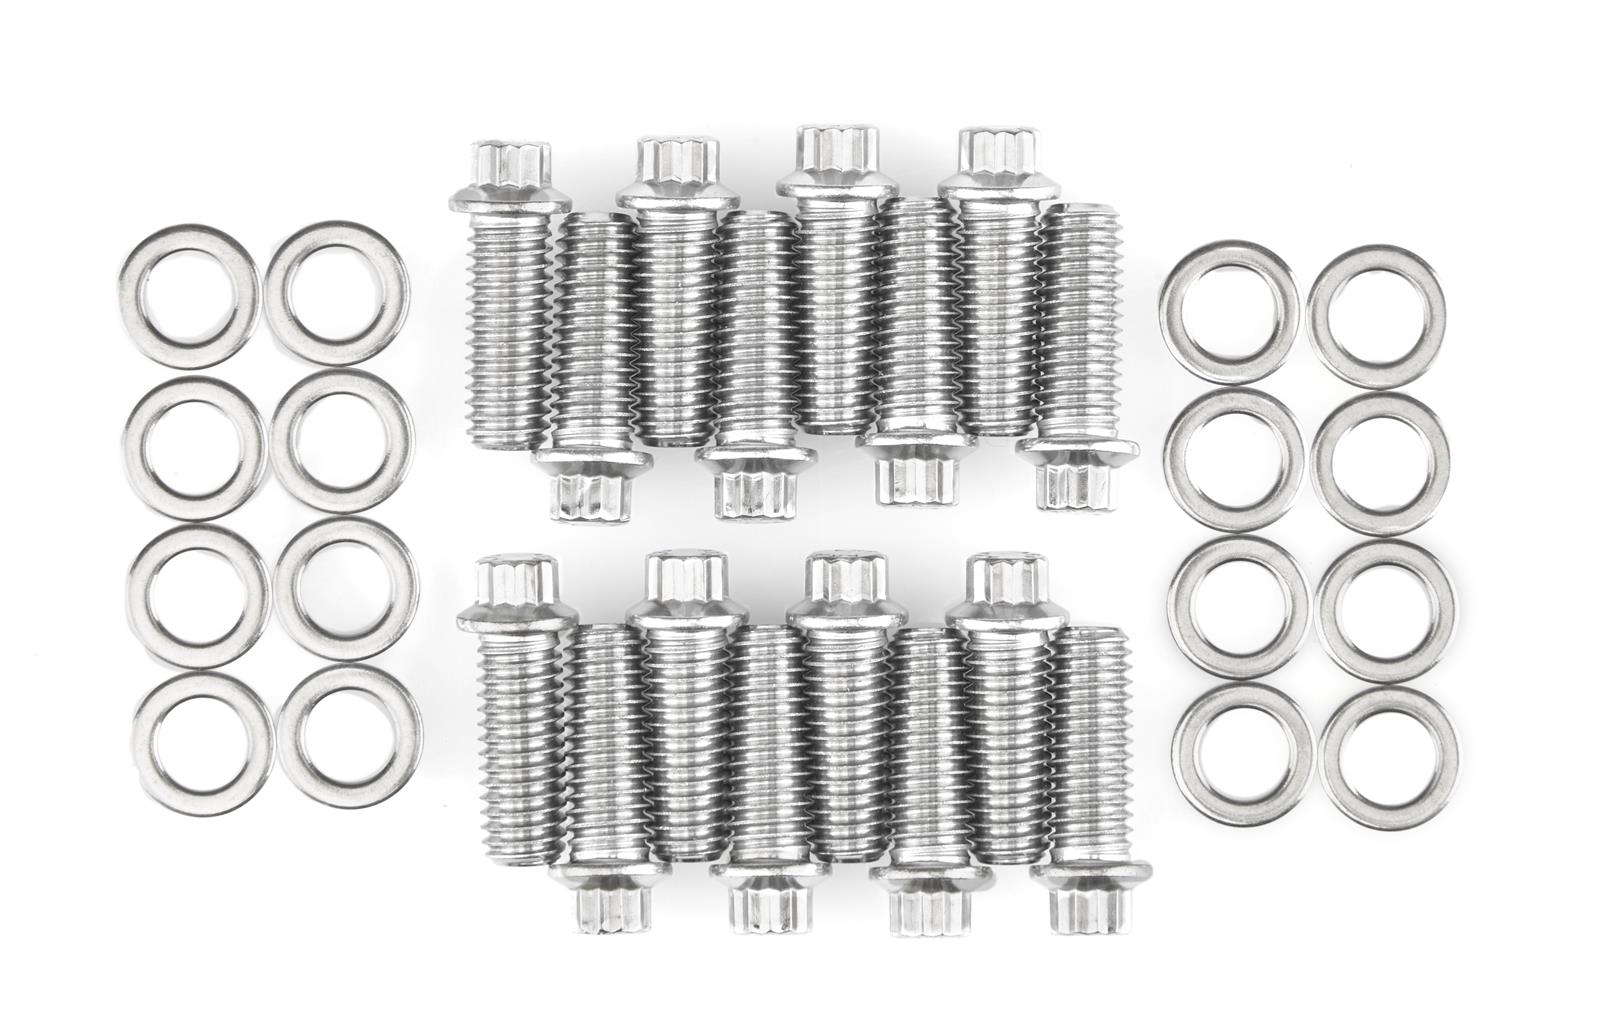 Exhaust Manifold Studs Stainless Steel with Flange Nuts Metric Various